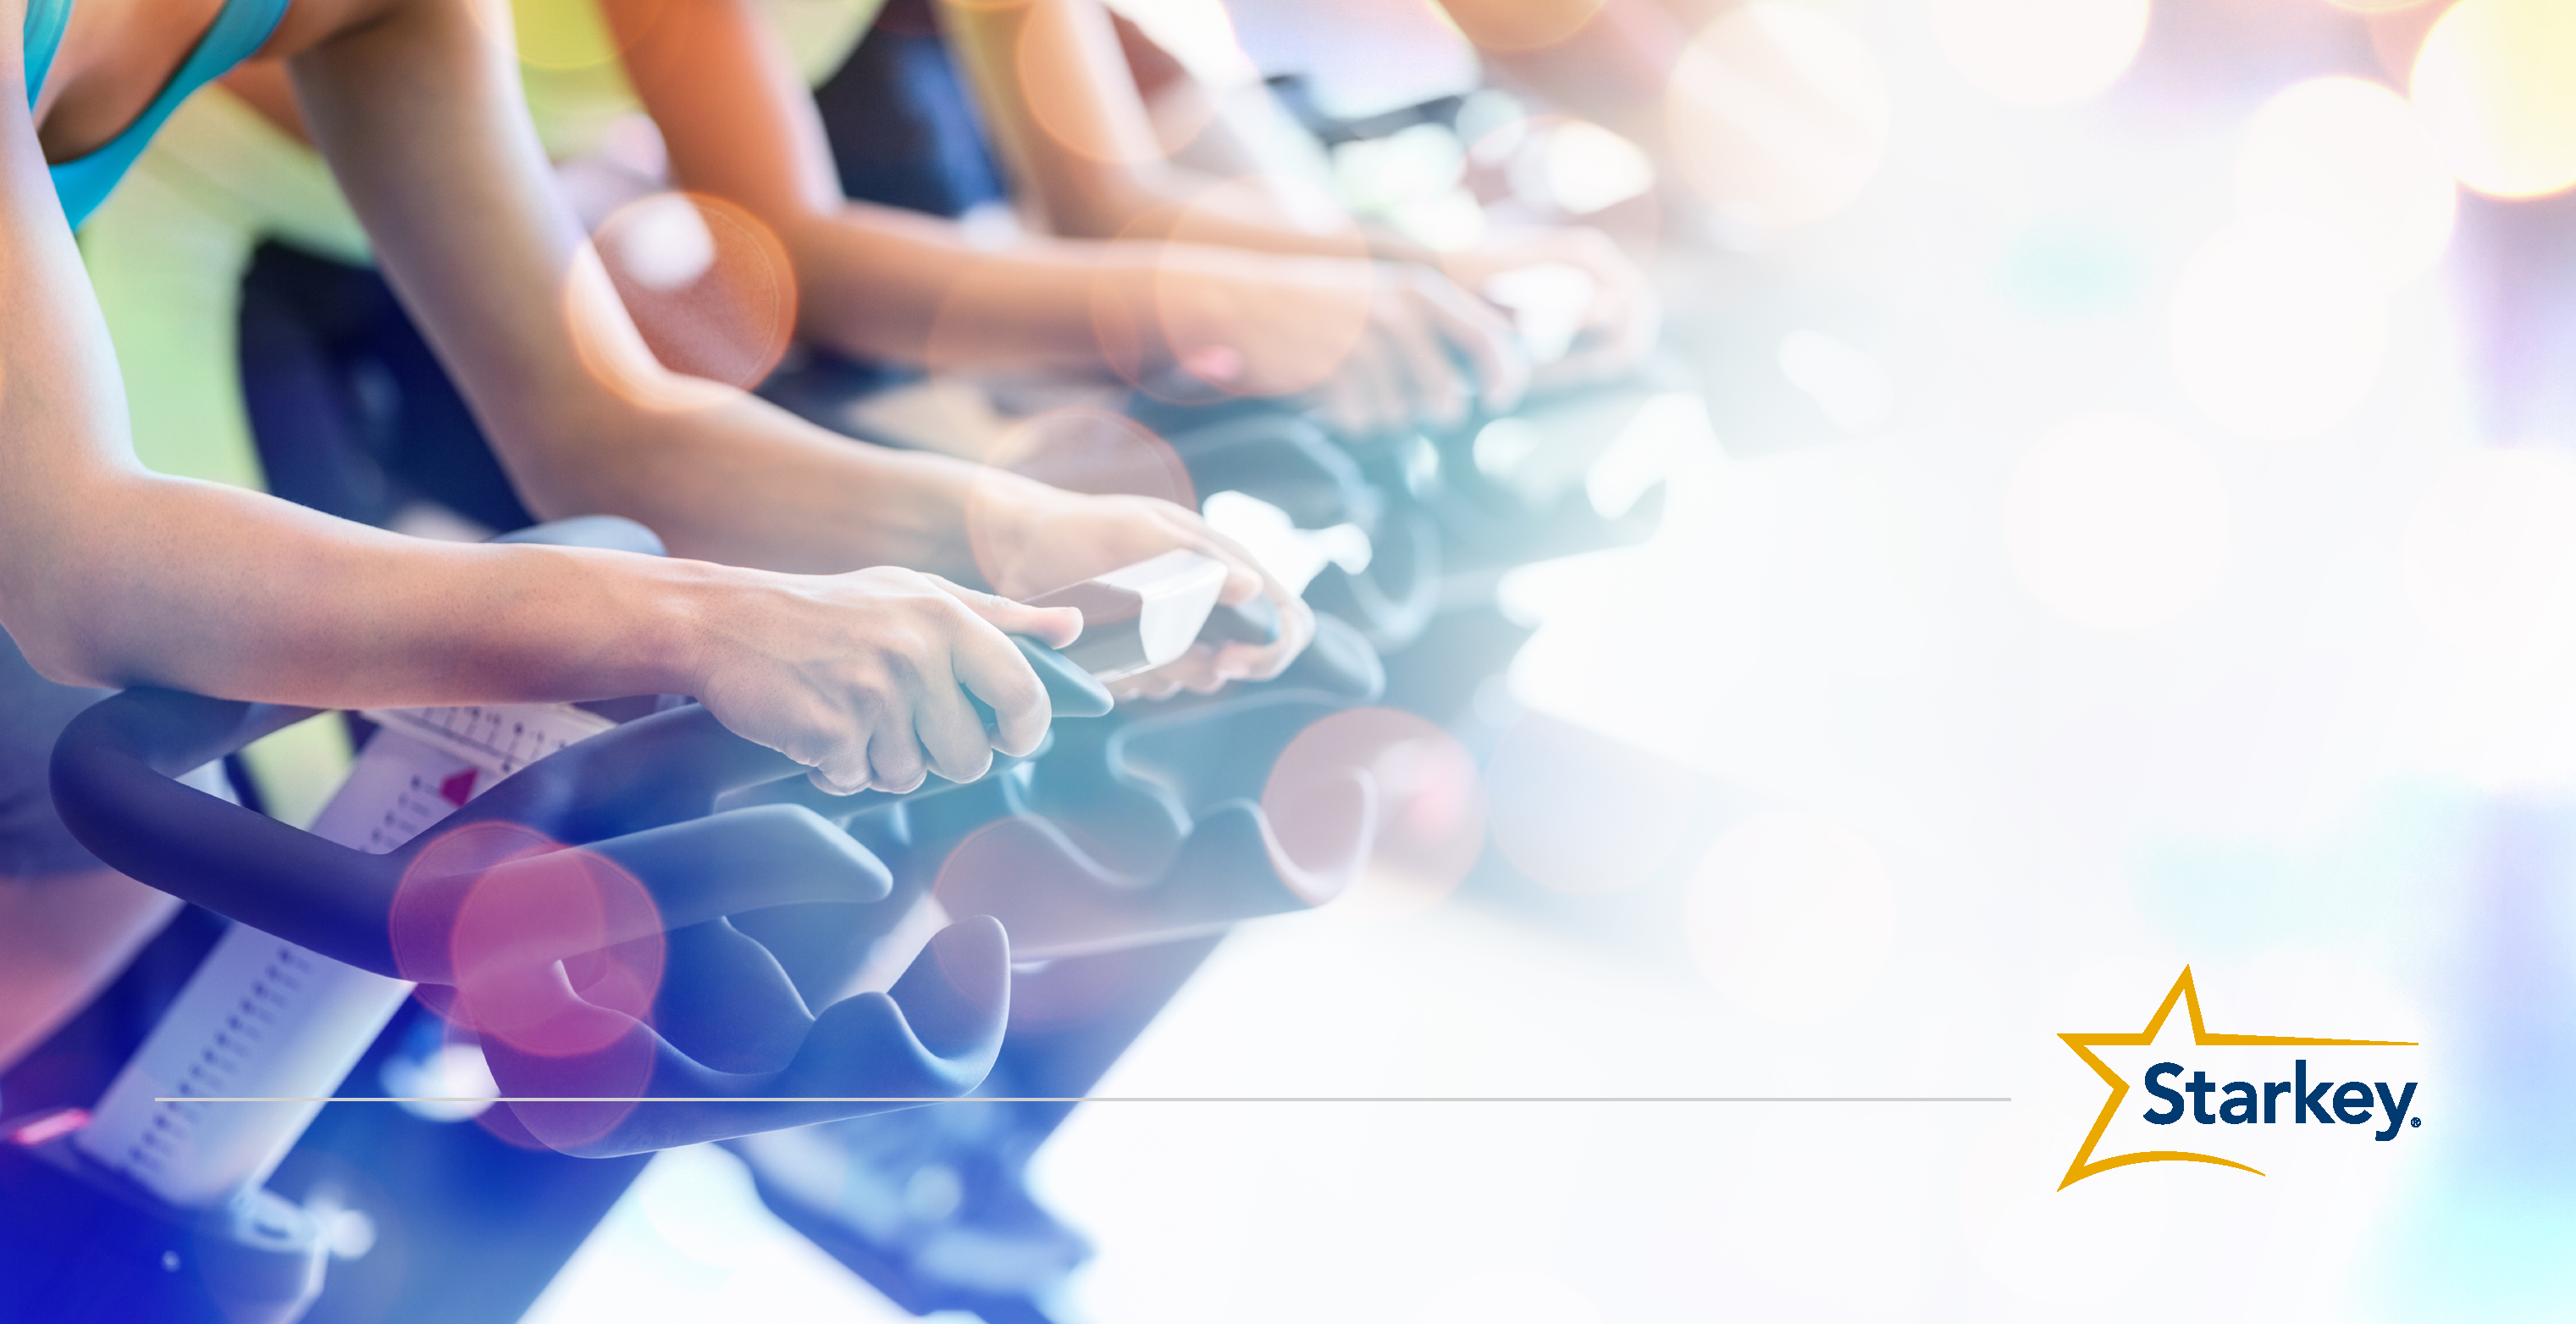 Glowing background against cropped image of people in spin class